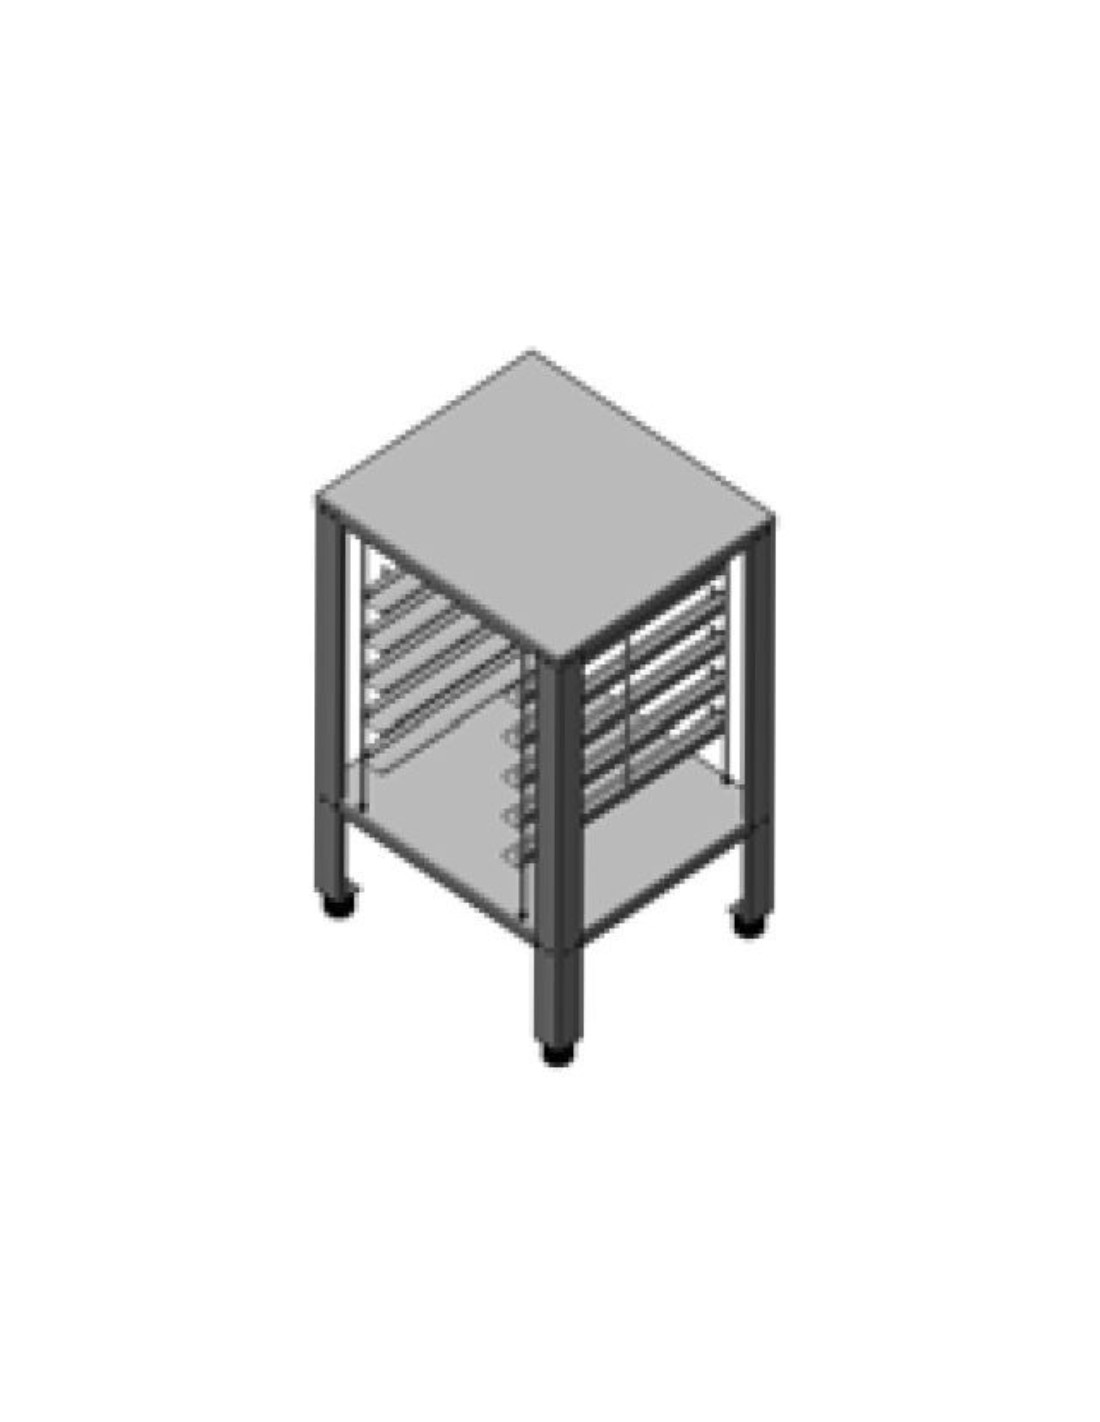 Fixed table in AISI 430 with universal supports - Capacity: 6 pans 2/3 GN or 6 grids cm 42.5 x 34 - cm 61 x 63 x 79.1 h - P